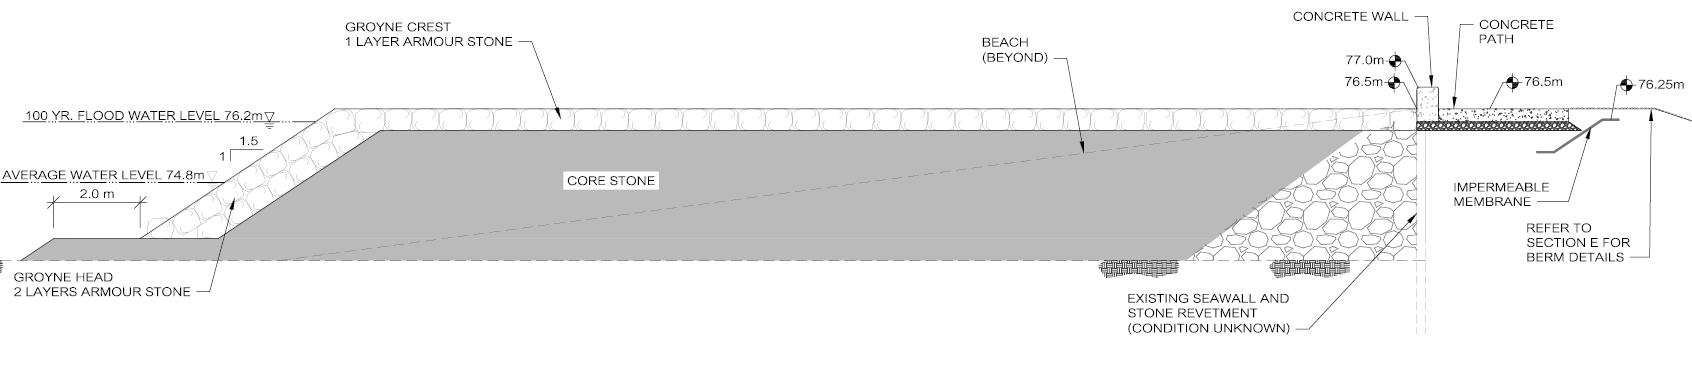 Longitudinal cross-section of an armourstone groyne backed by a low concrete wall.